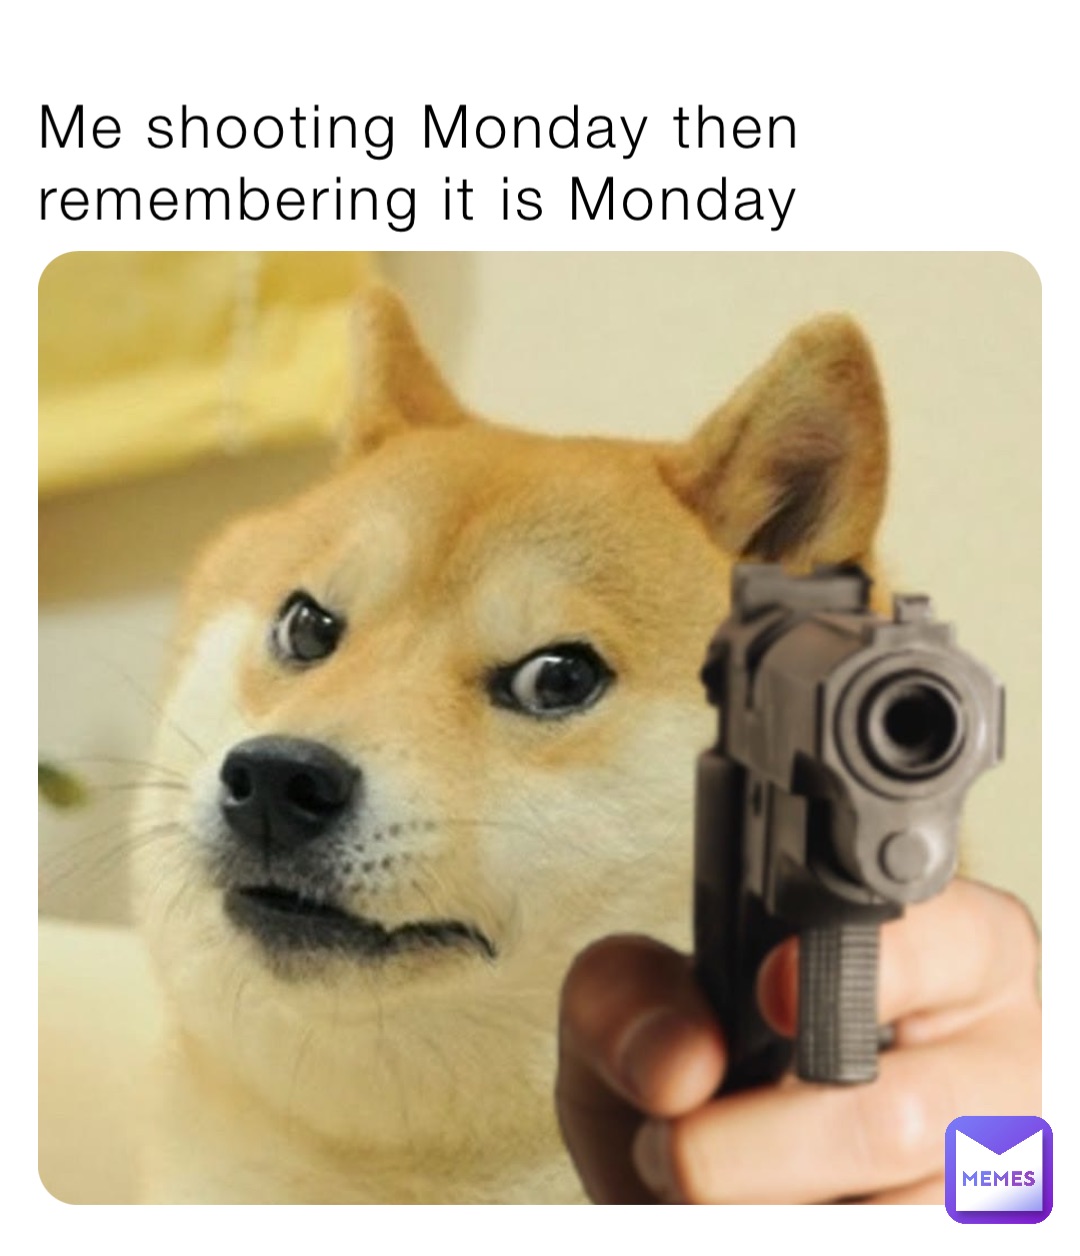 Me shooting Monday then remembering it is Monday